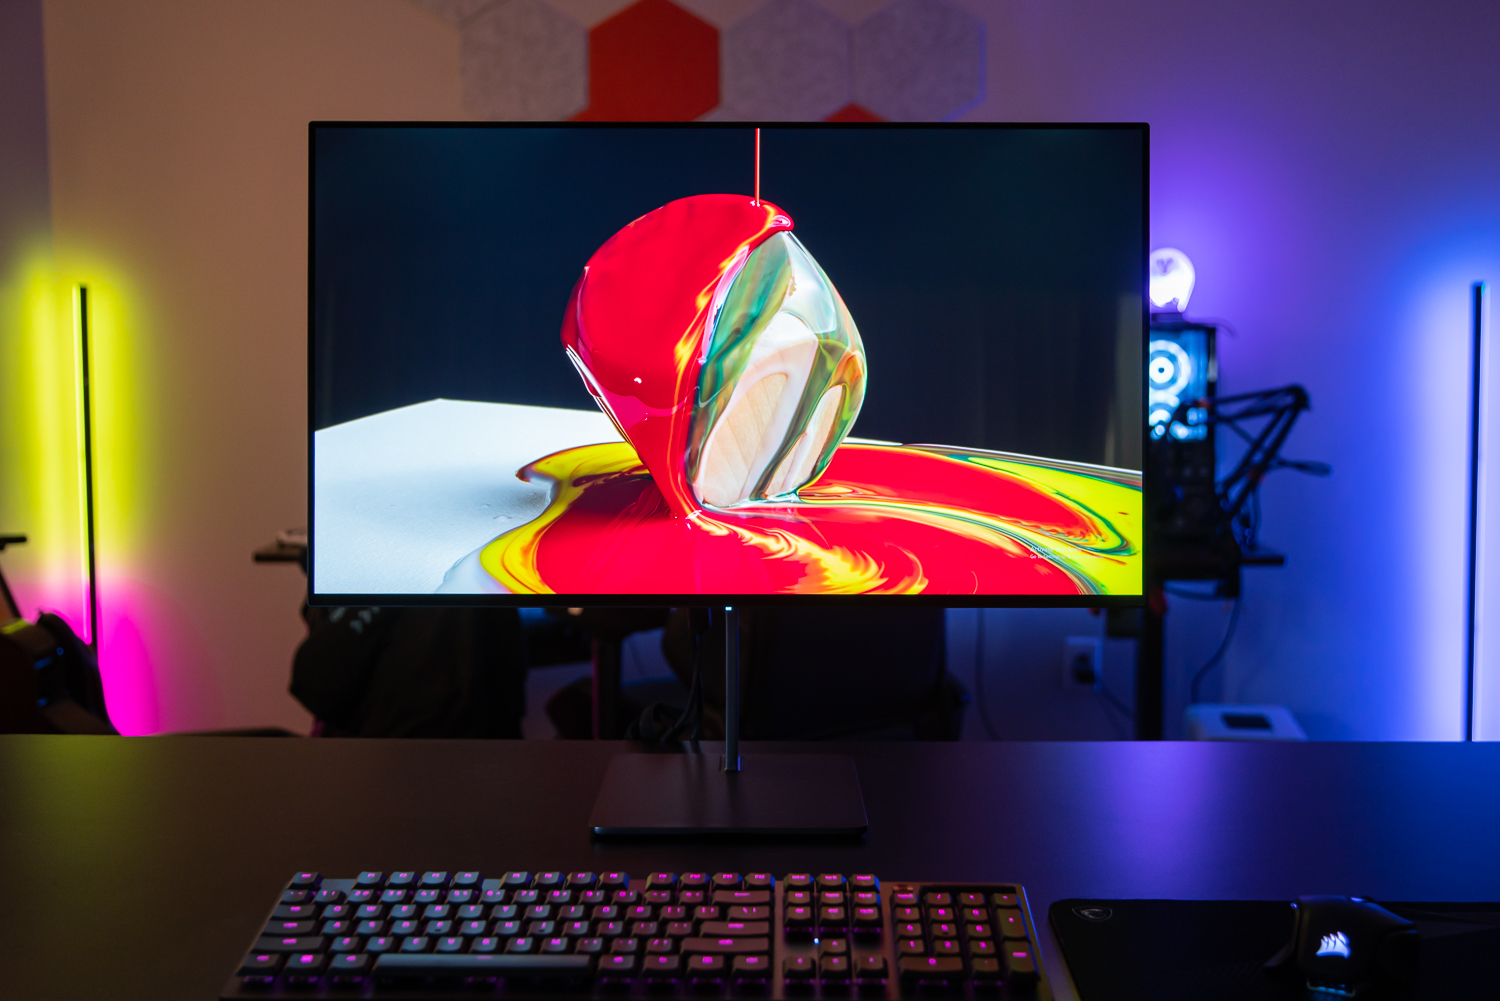 The Spectrum 4K Glossy made me ditch matte gaming monitors ...